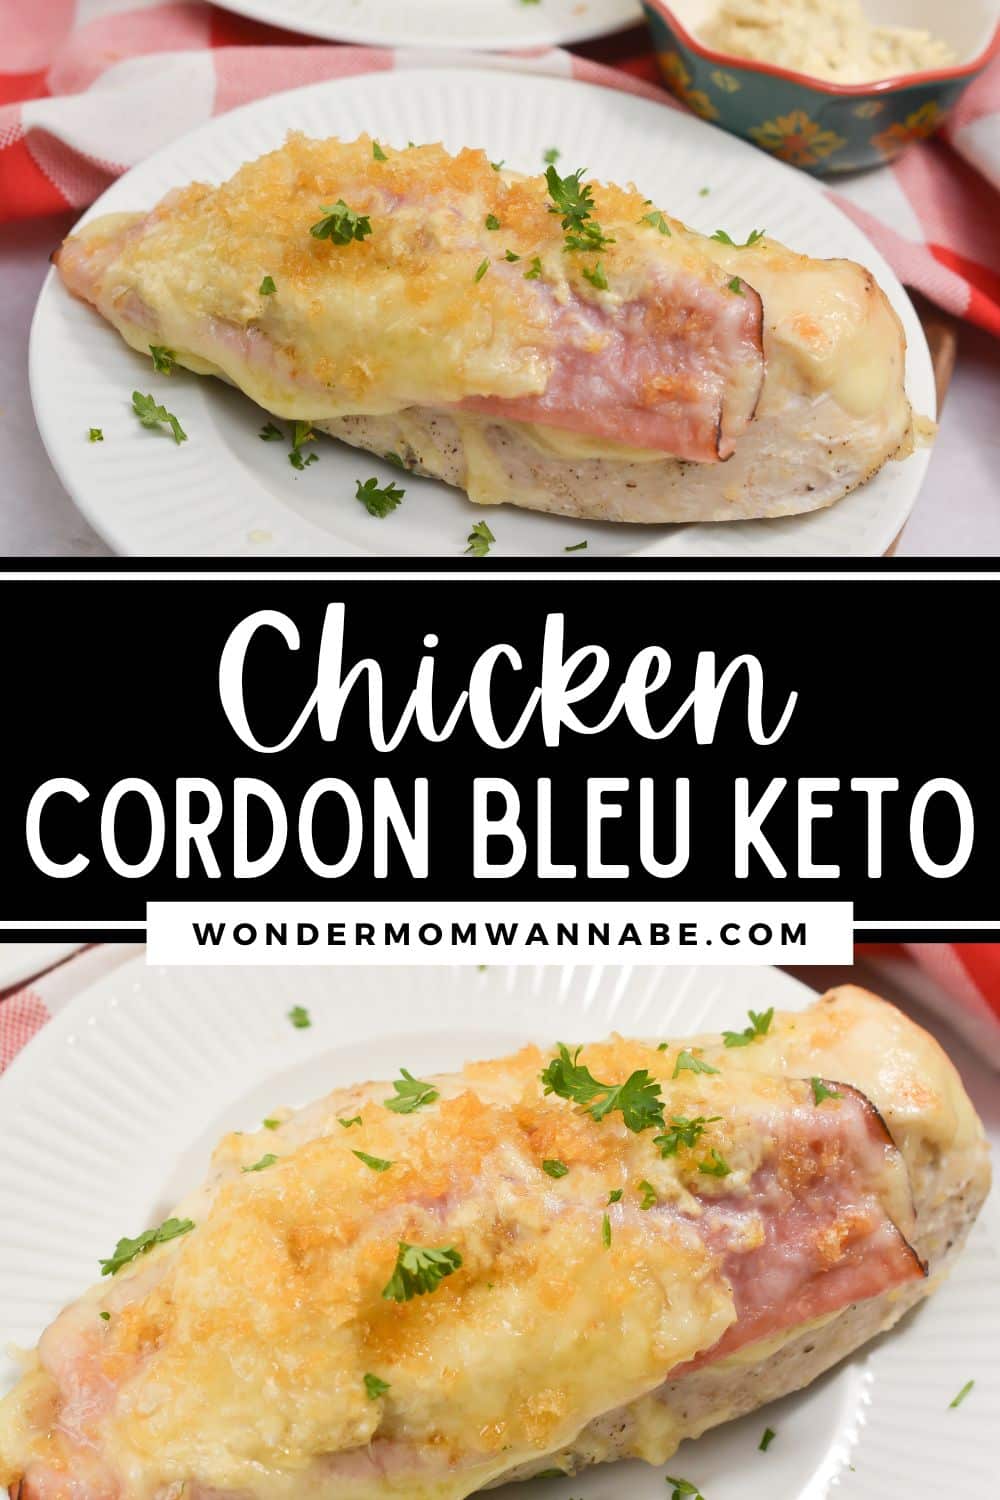 Indulge in a delicious plate of keto-friendly chicken cordon bleu.